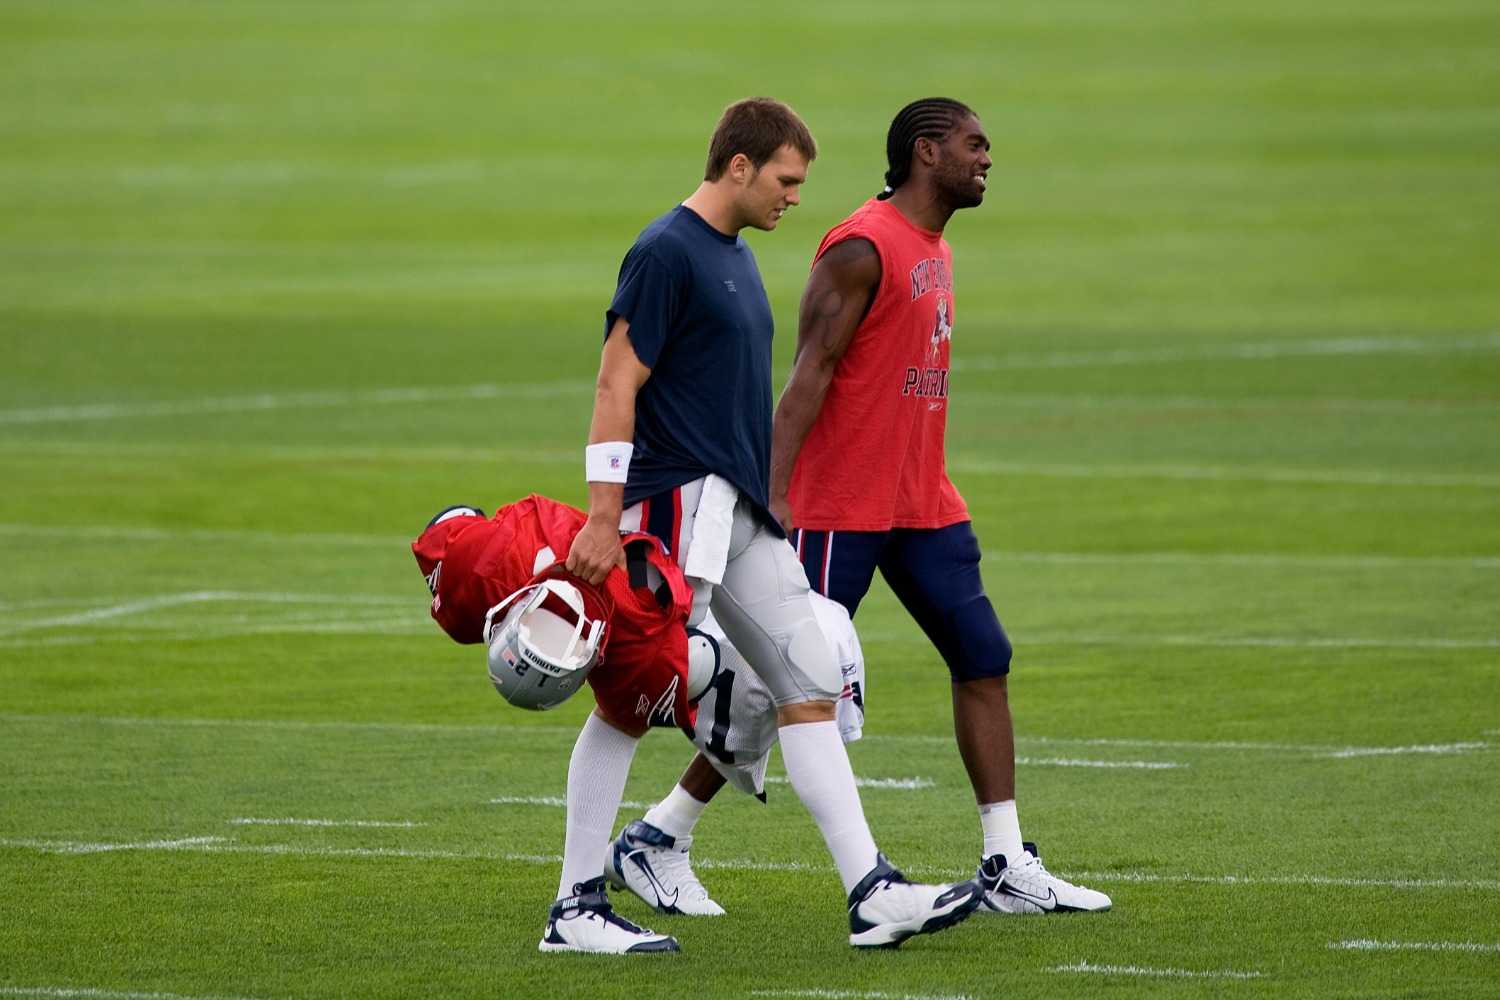 Tom Brady just tried to lure Randy Moss out of retirement to join him in Tampa.